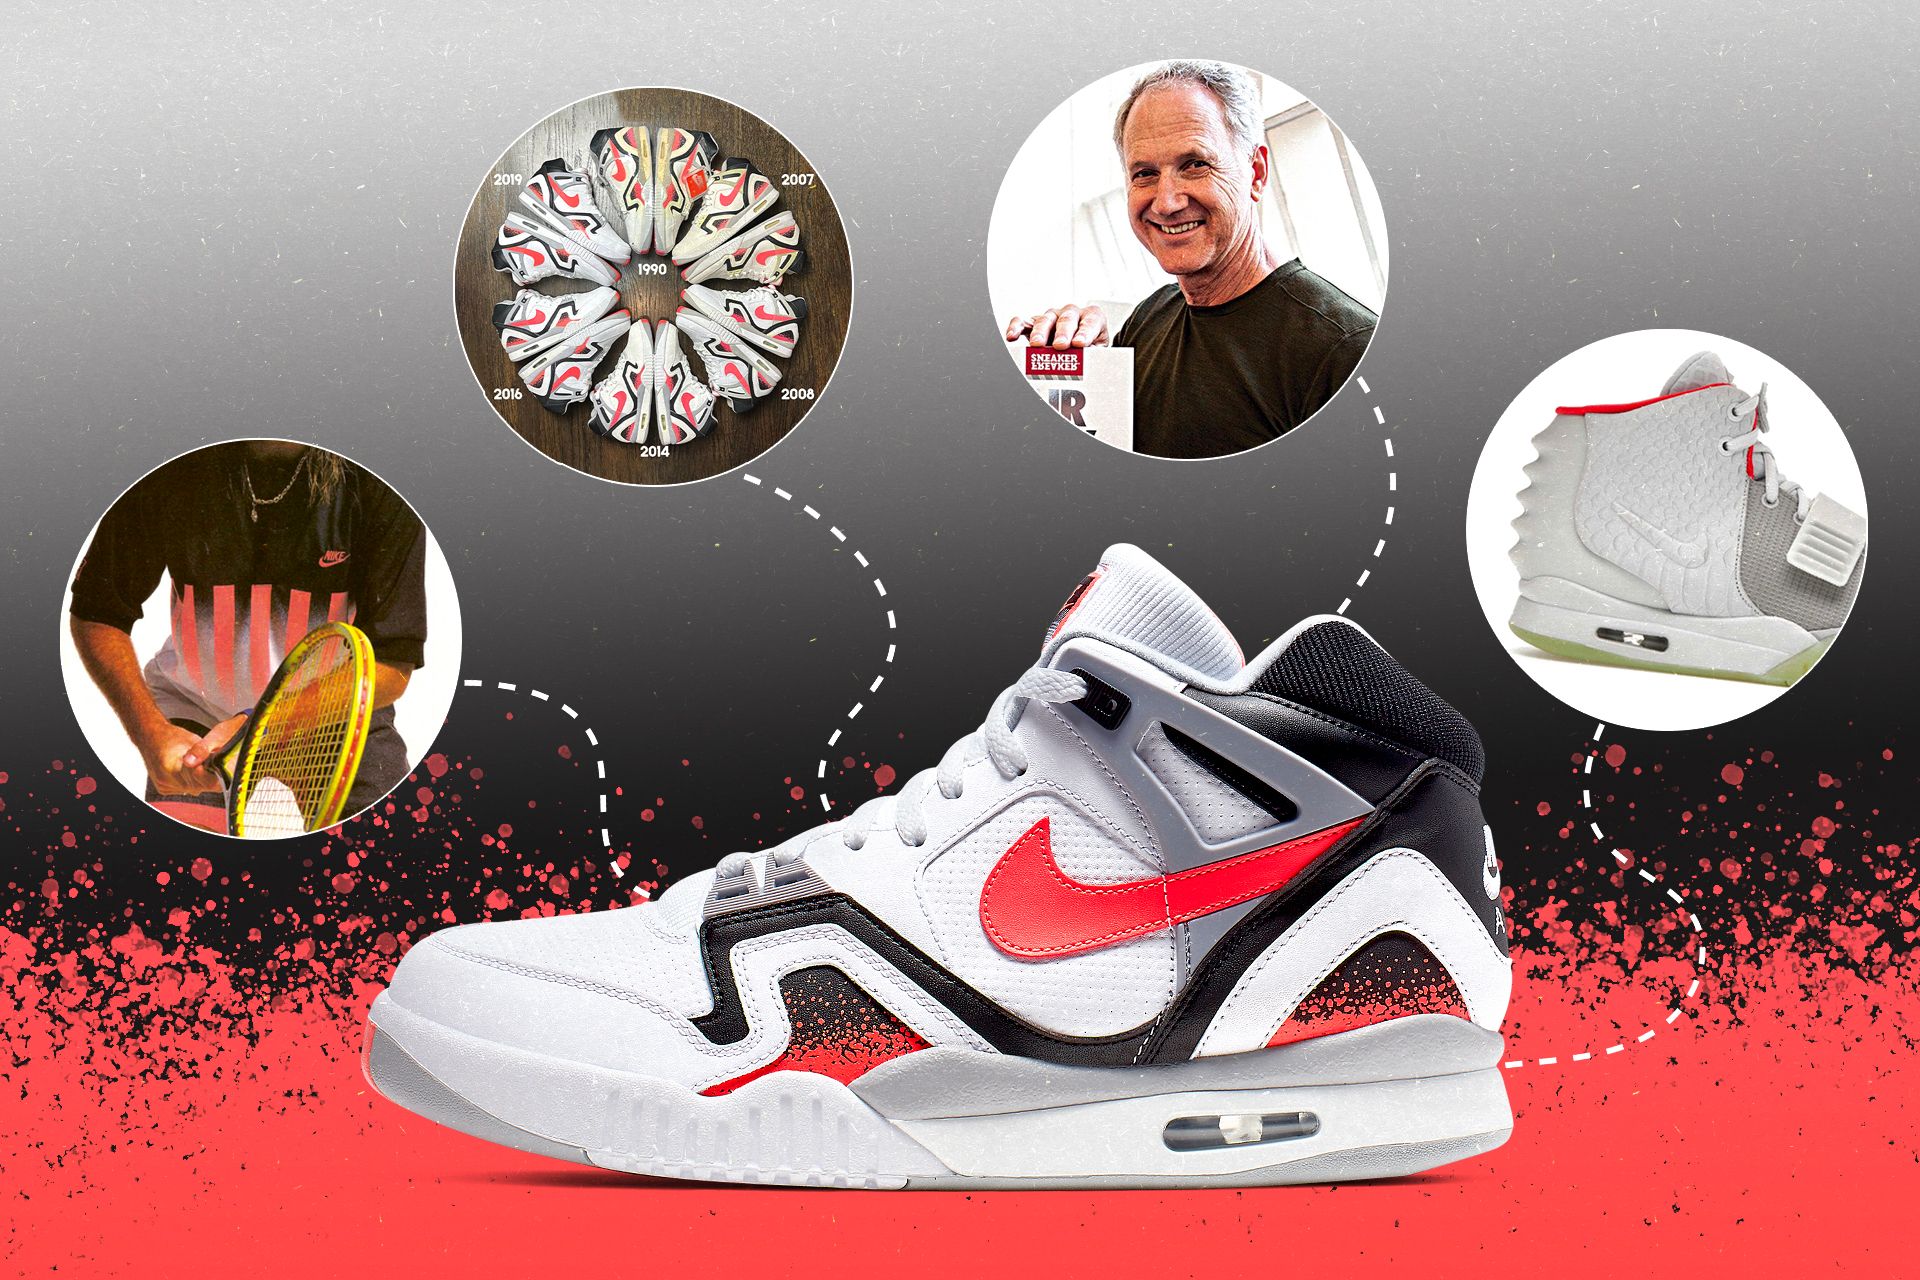 Everything You Need to Know About Andre Agassi’s Nike Air Tech Challenge II